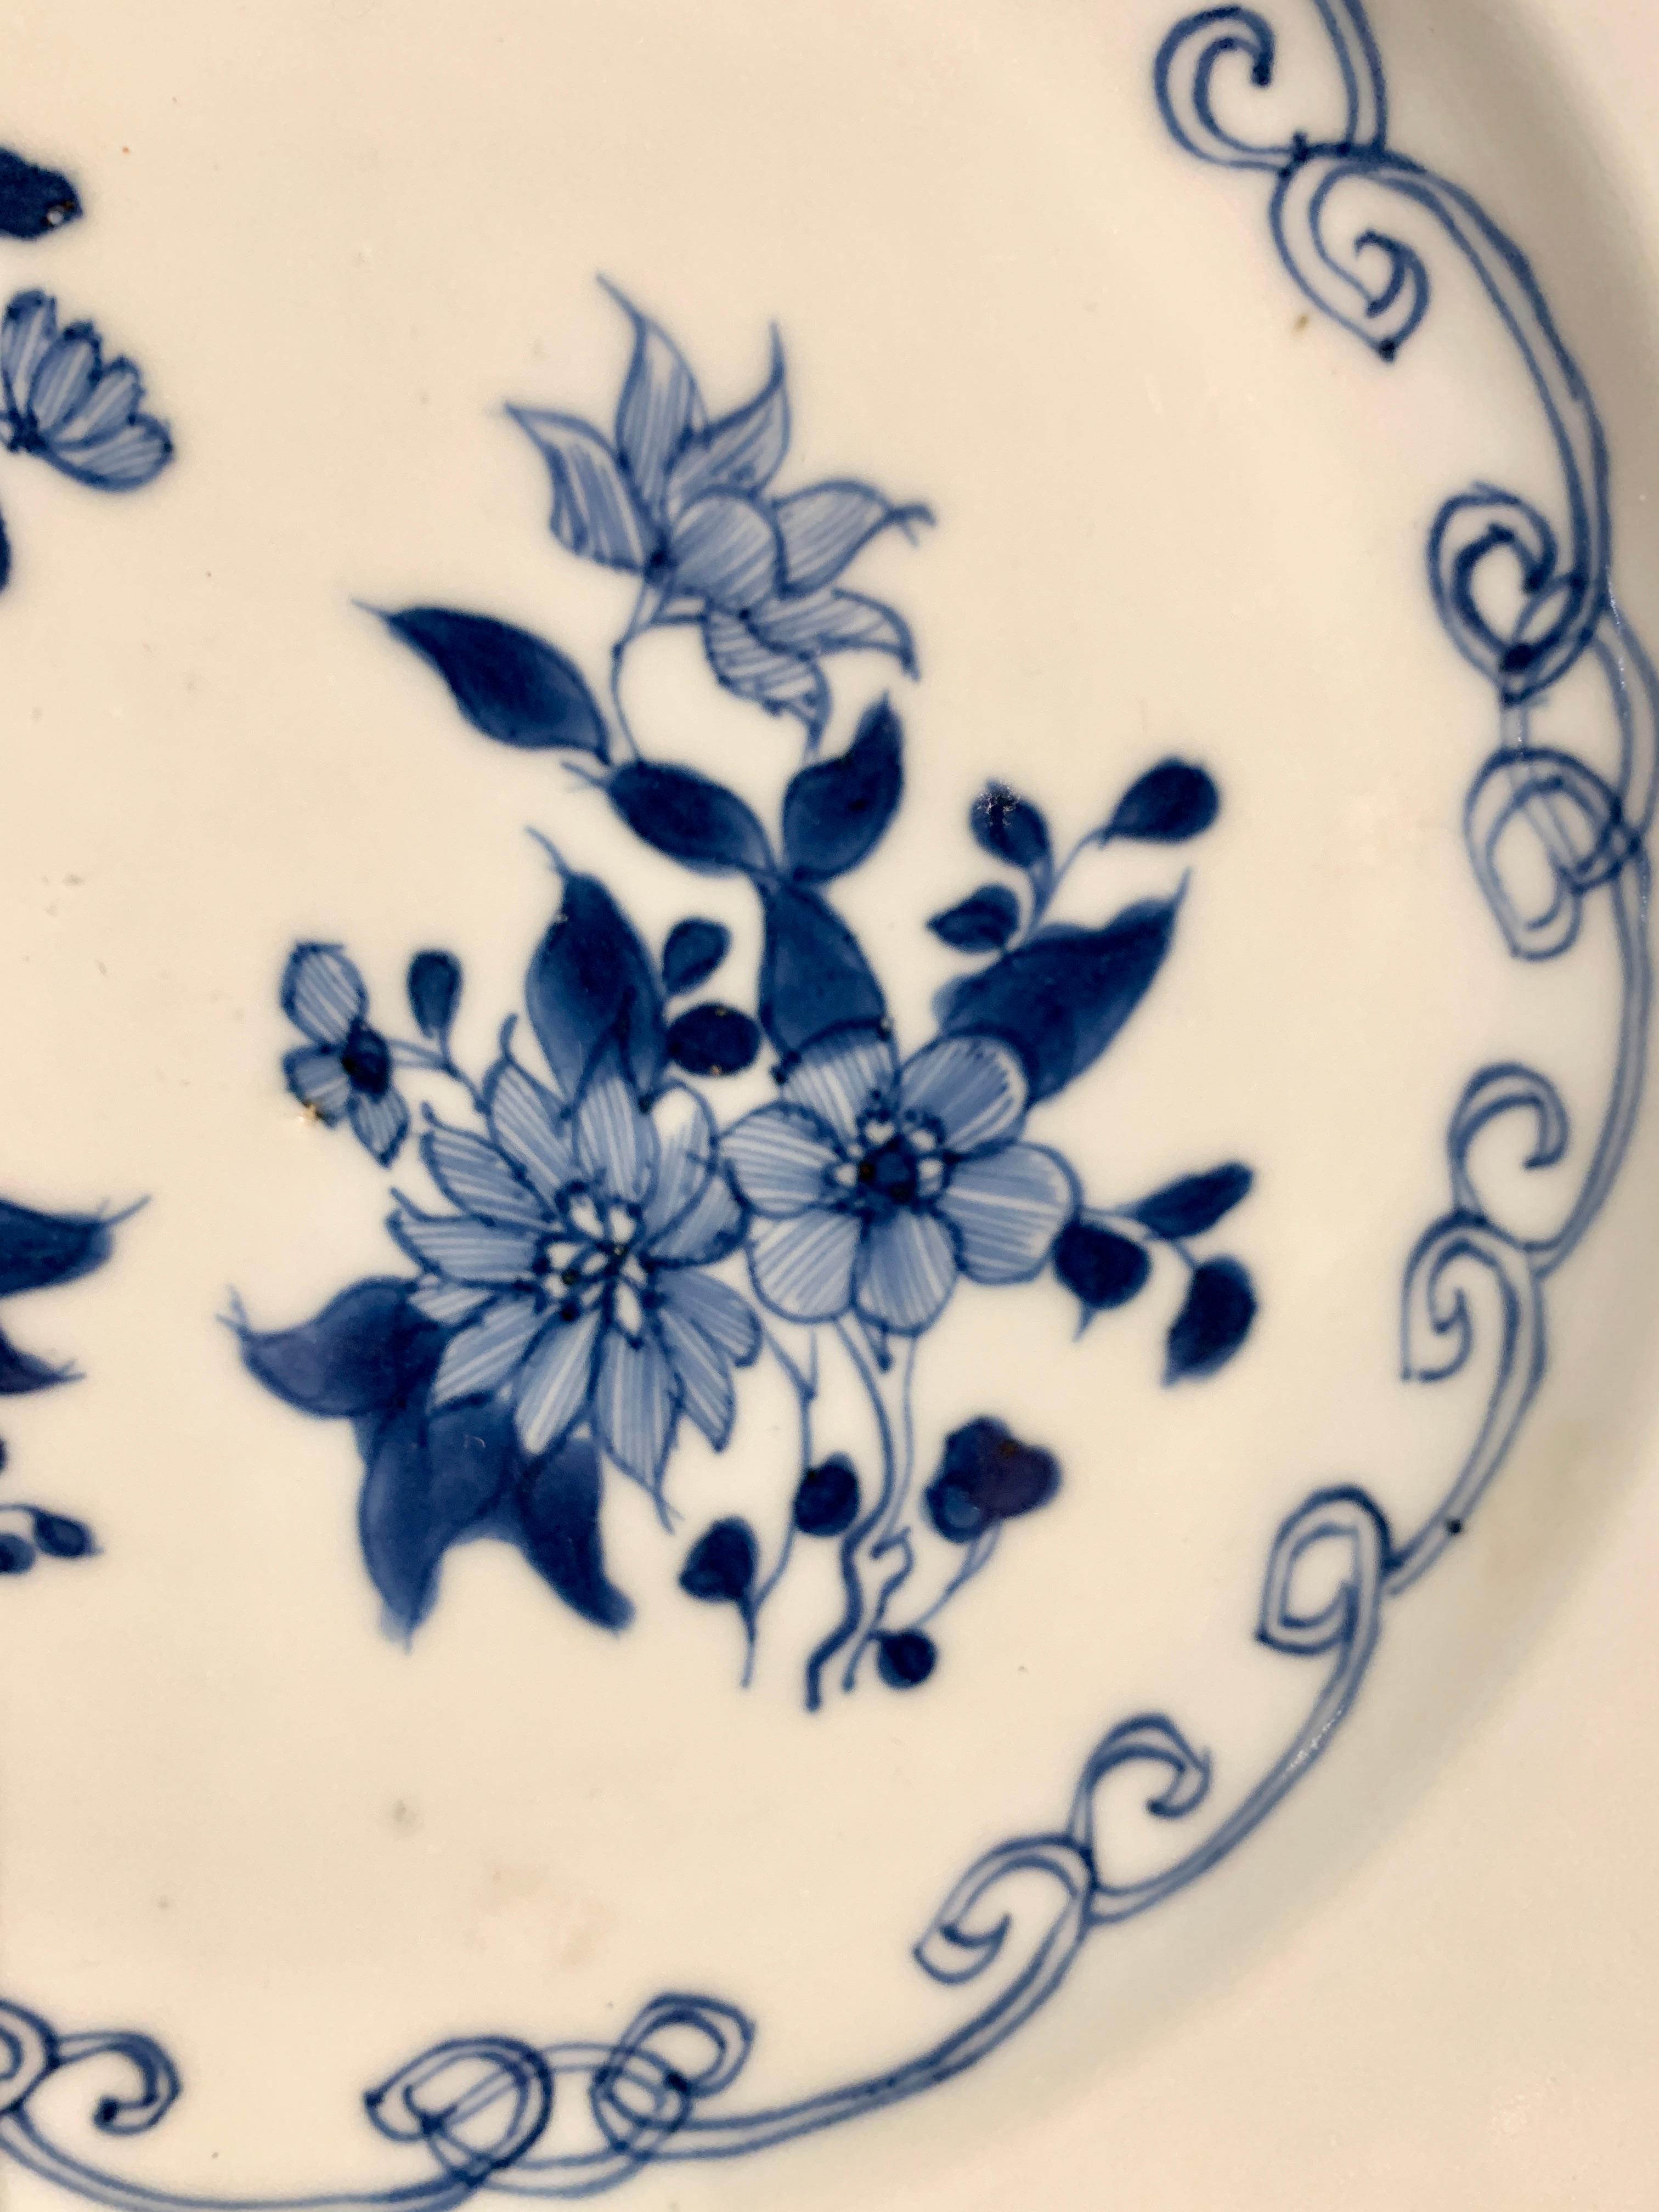 Enameled Chinese Export Blue and White Porcelain Plates, Set of 10, 18th Century, China For Sale